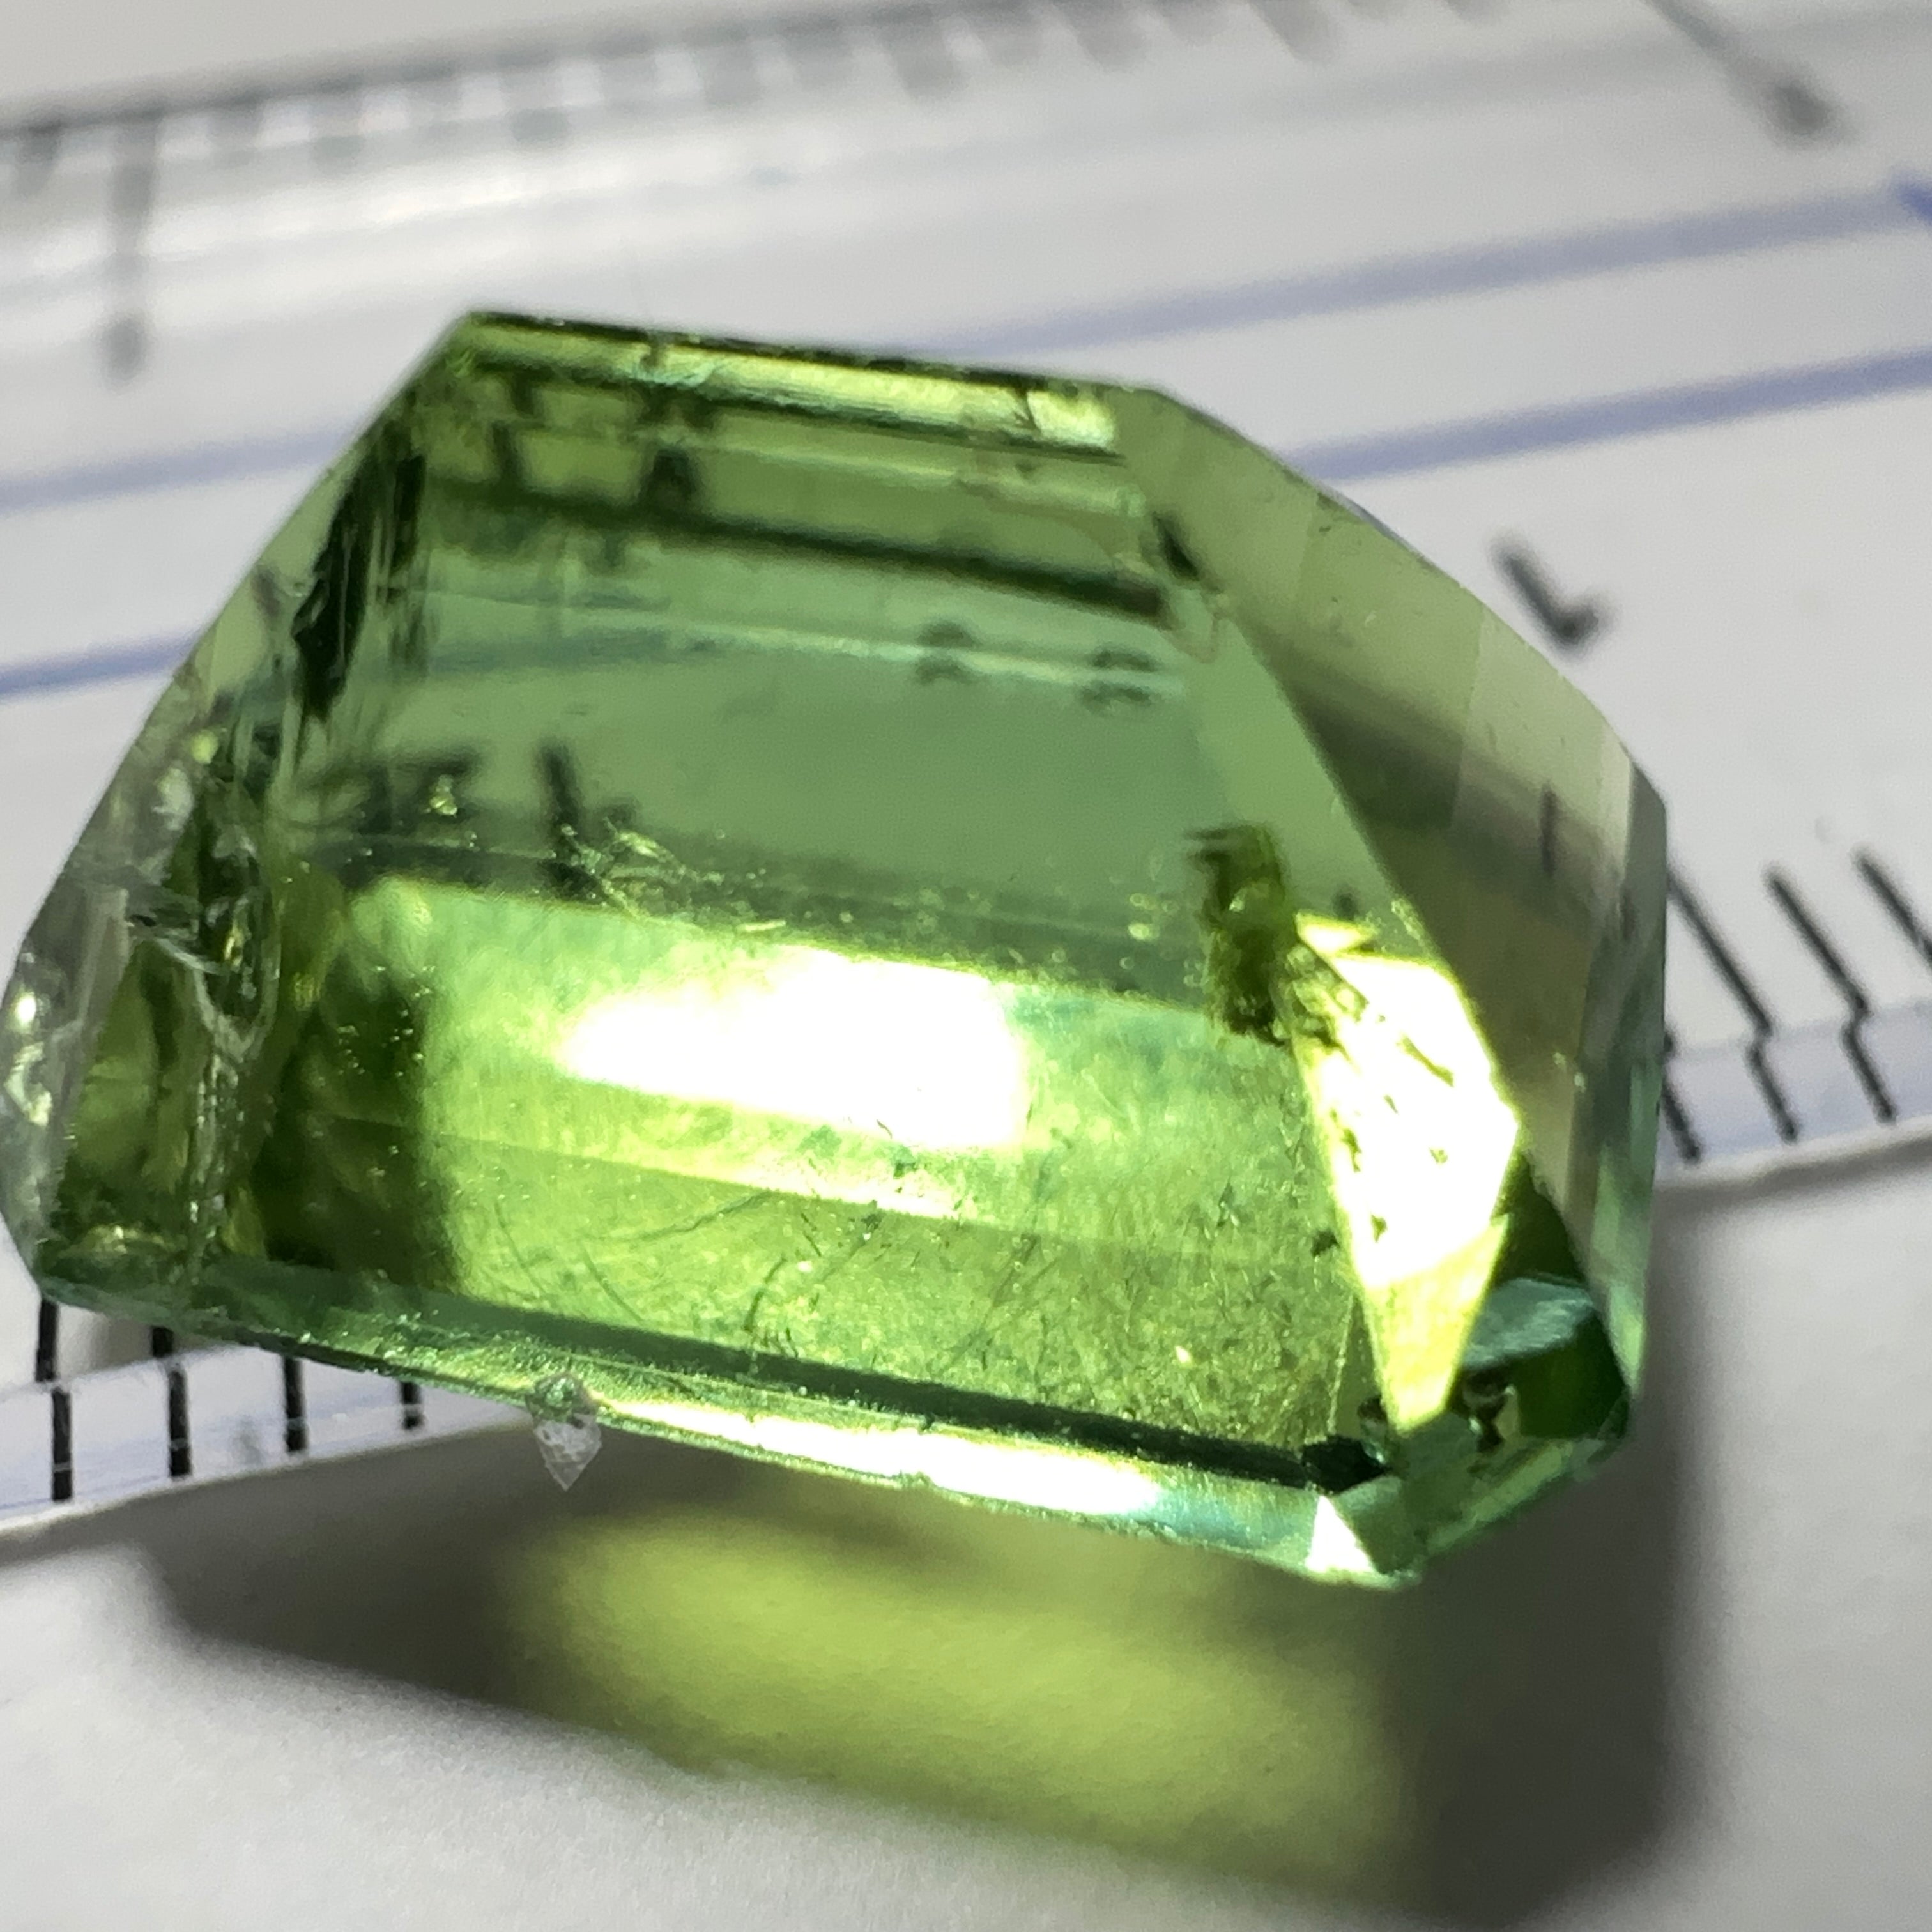 7.18ct Mozambique Tourmaline - Unheated Untreated. Salvaged from an old stock of Mozambique unheated Tourmalines that had been put aside, there is a good portion, needs a recut, treat as a pre-shape for faceting, BUT LOOK AT THAT COLOUR